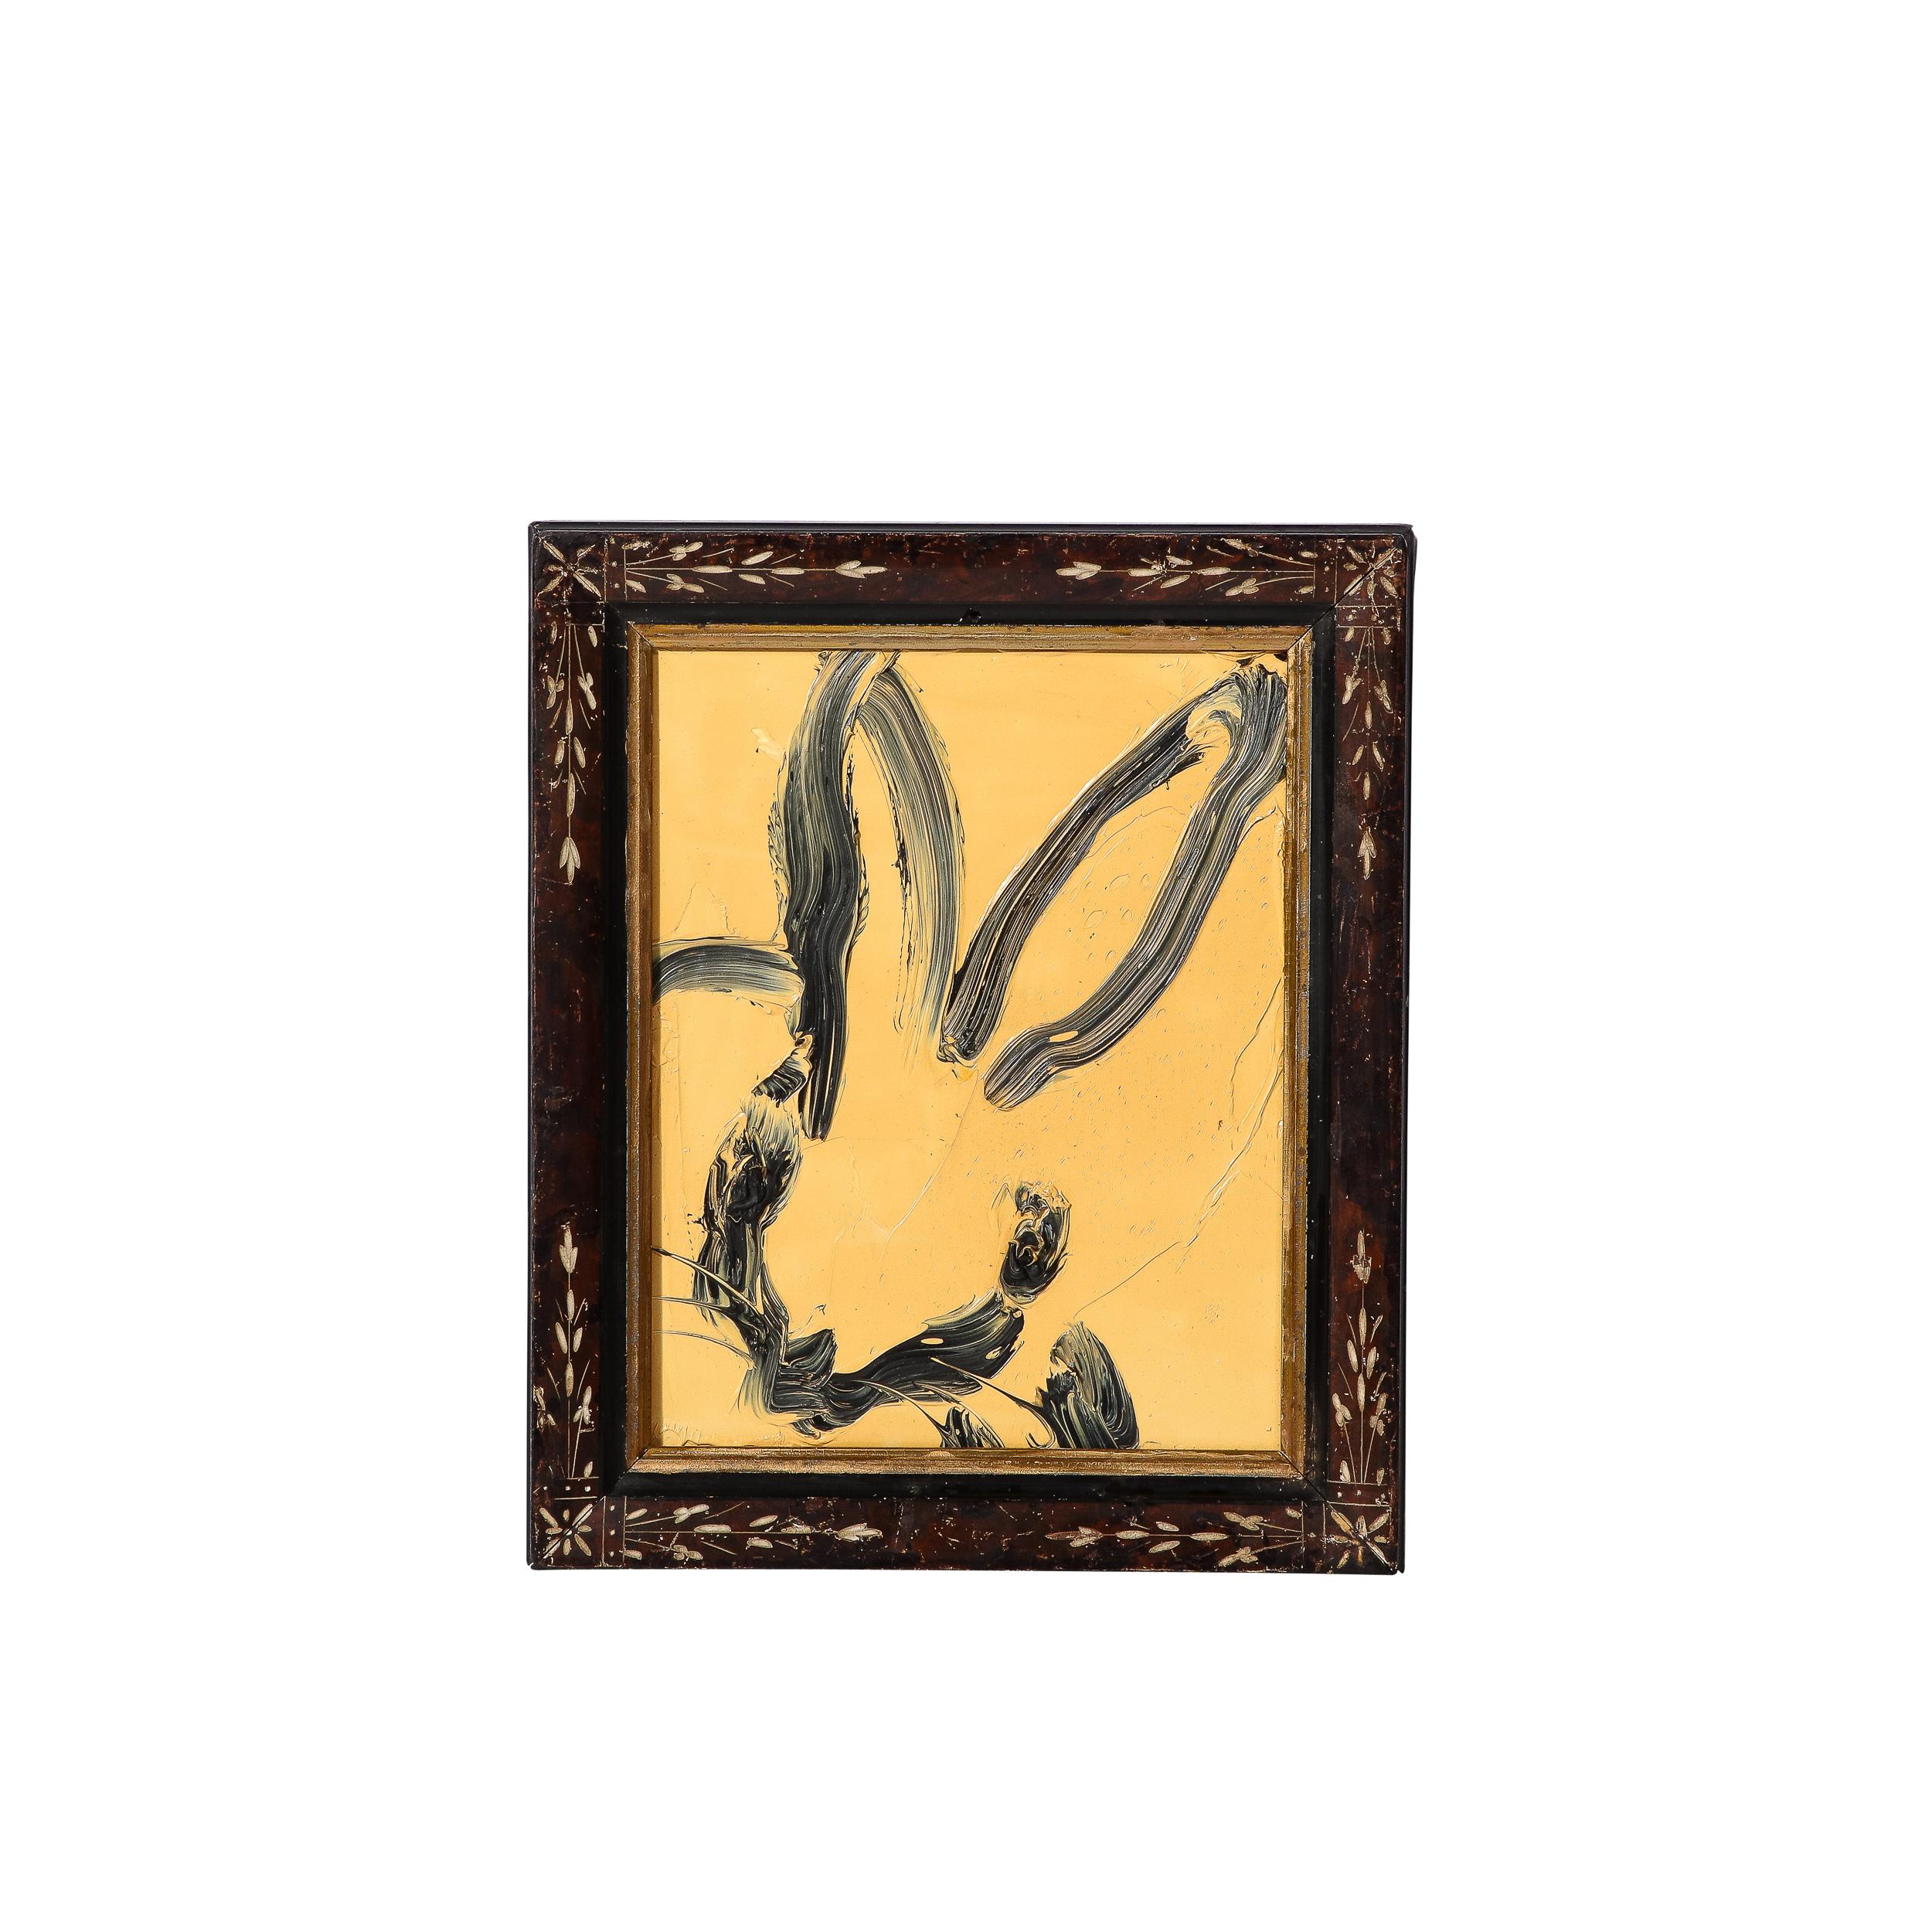 This whimsical and sophisticated painting was realized by the esteemed contemporary painter, Hunt Slonem in 2013. This piece features a lovely background in a muted sunflower yellow with bold and deftly rendered brush strokes depicting a rabbit in